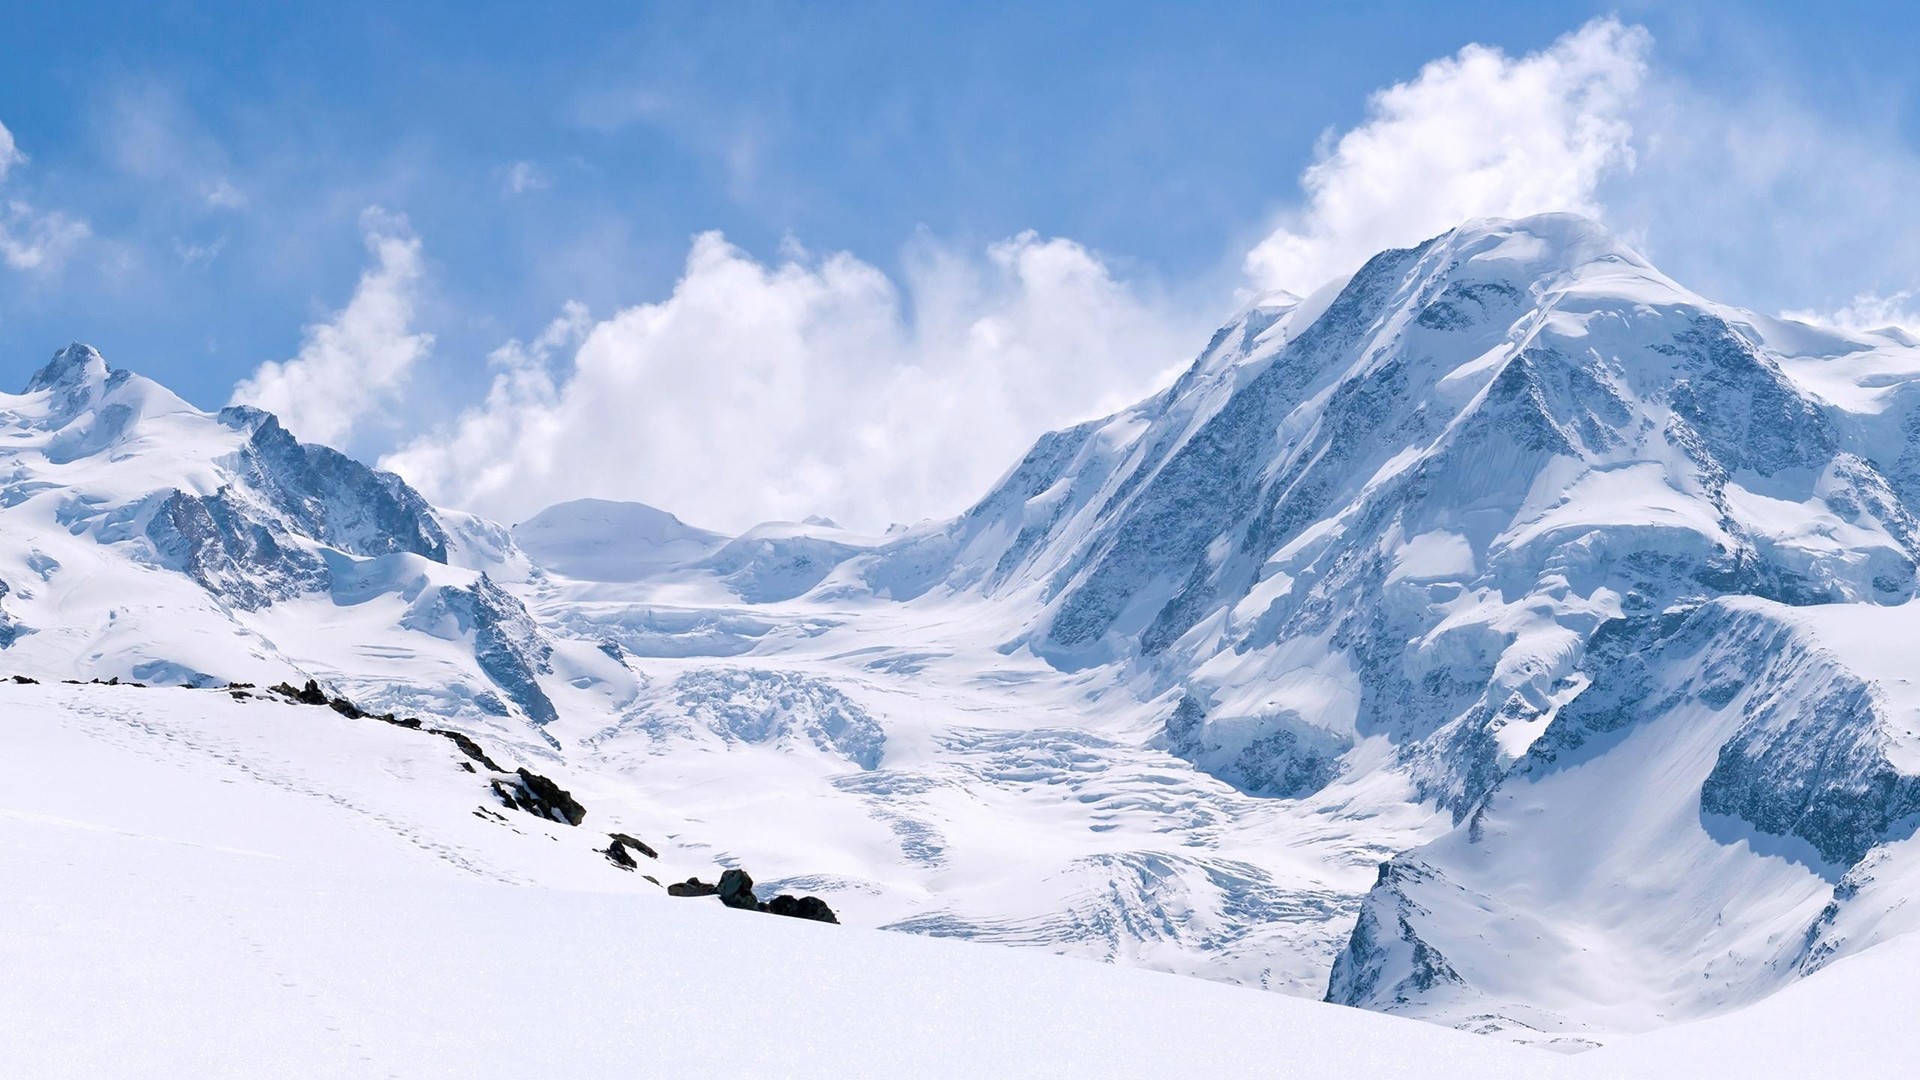 General 1920x1080 winter snow mountains snowy peak nature ice cold